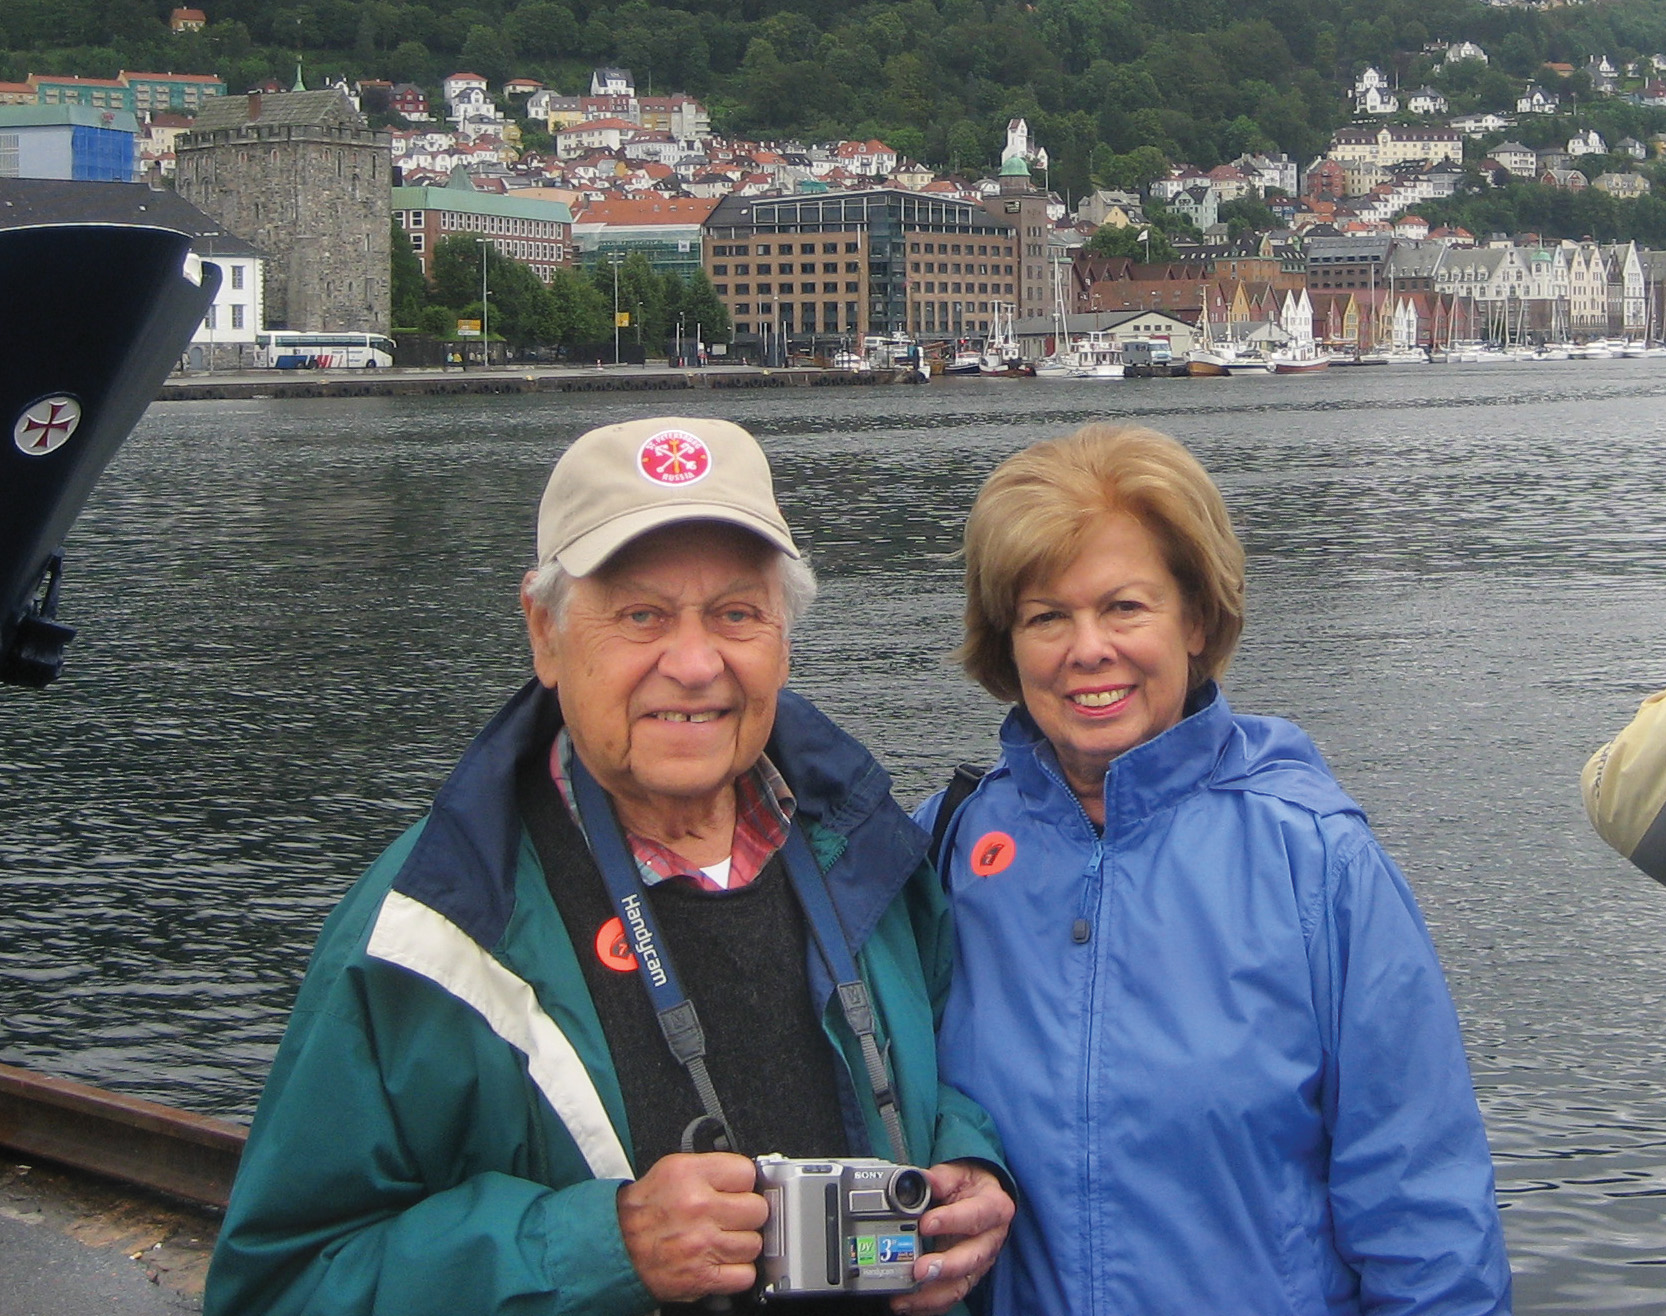 Bernie Sevel and his wife Deane visited Europe together in 2007. This time most of the houses and roofs and the bridges were intact. 